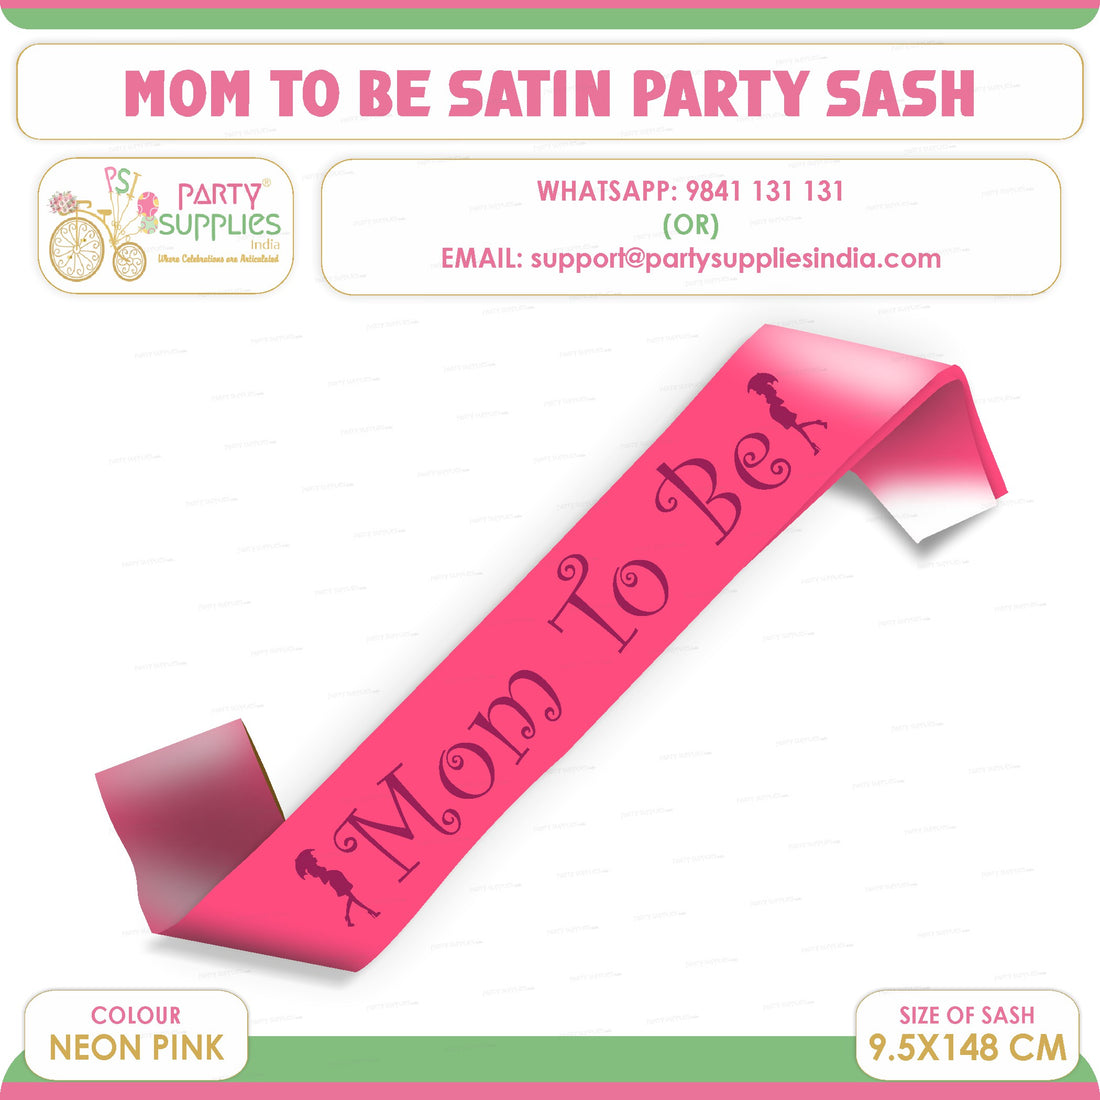 PSI Mom to Be Neon Pink Satin Party Sash